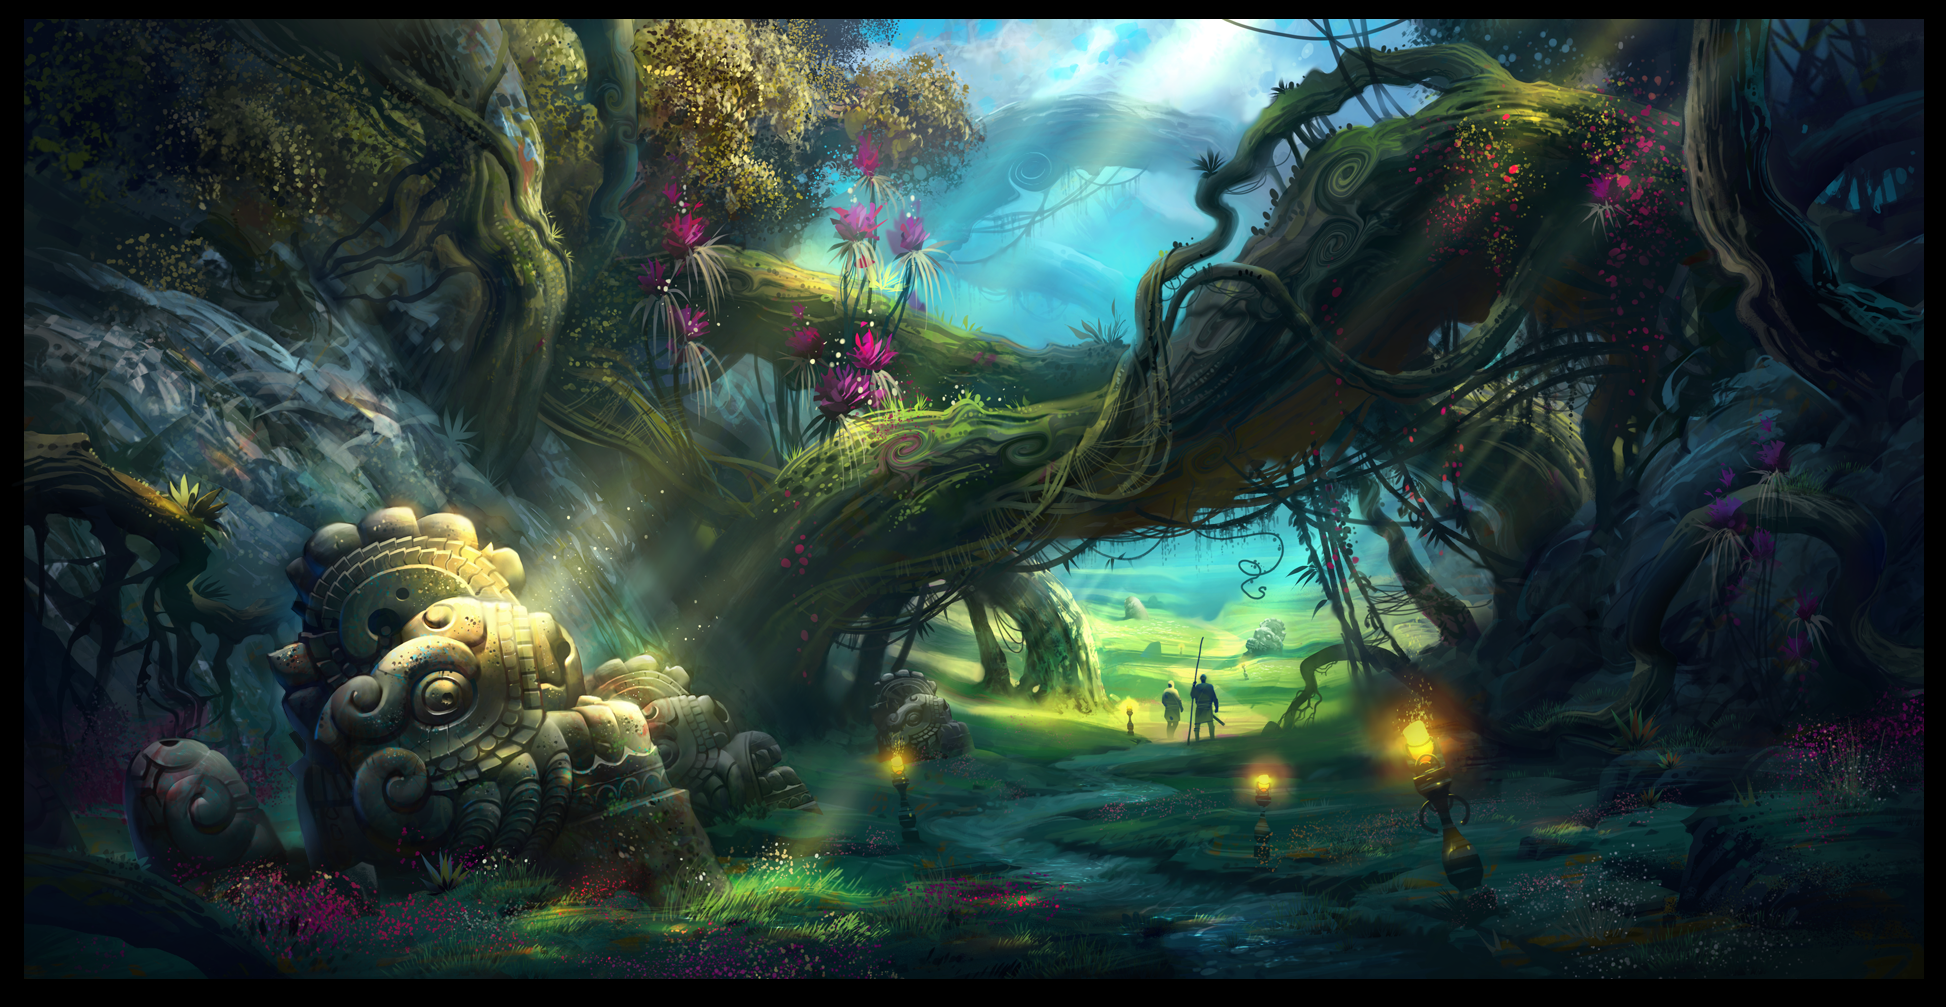 Image - Magic forest 2 by ivany86-d5cl0xq.png | Lawler RPG Wiki ...